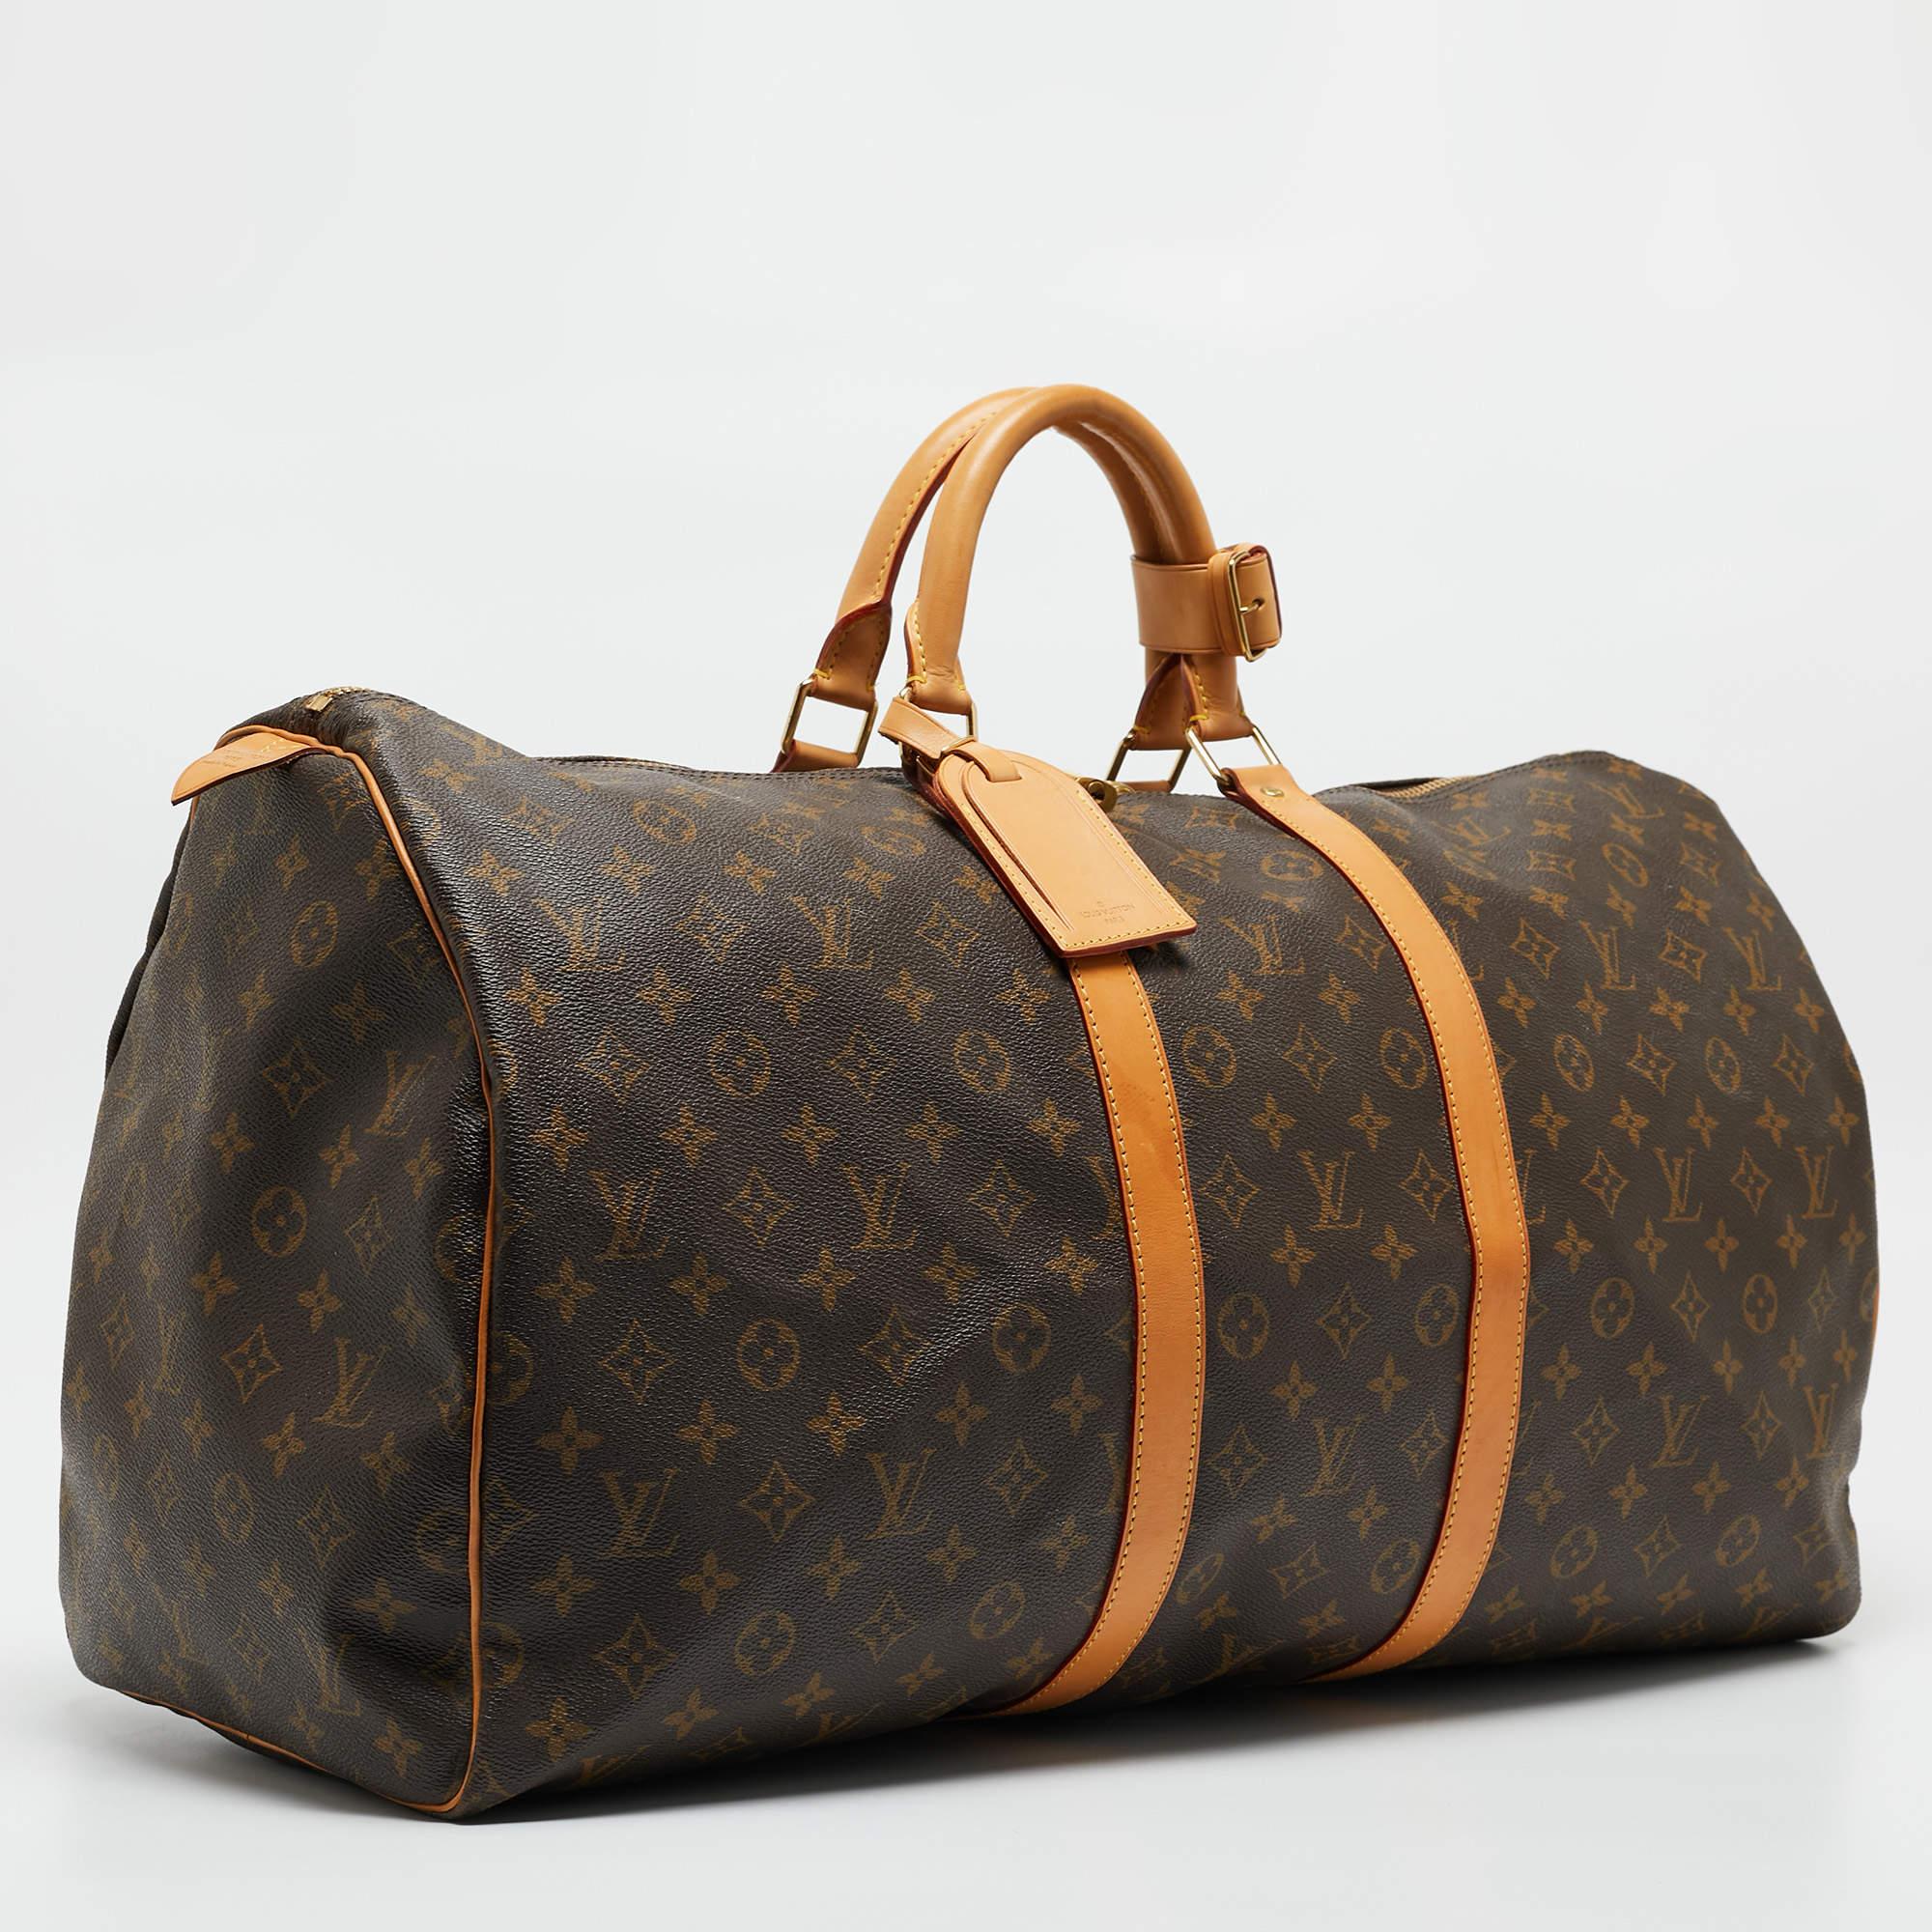 Crafted from iconic Louis Vuitton Monogram Canvas, the Keepall 55 Bag epitomizes luxury travel. Its spacious interior accommodates essentials with ease, while sturdy leather handles and trim exude sophistication. Timeless yet contemporary, this